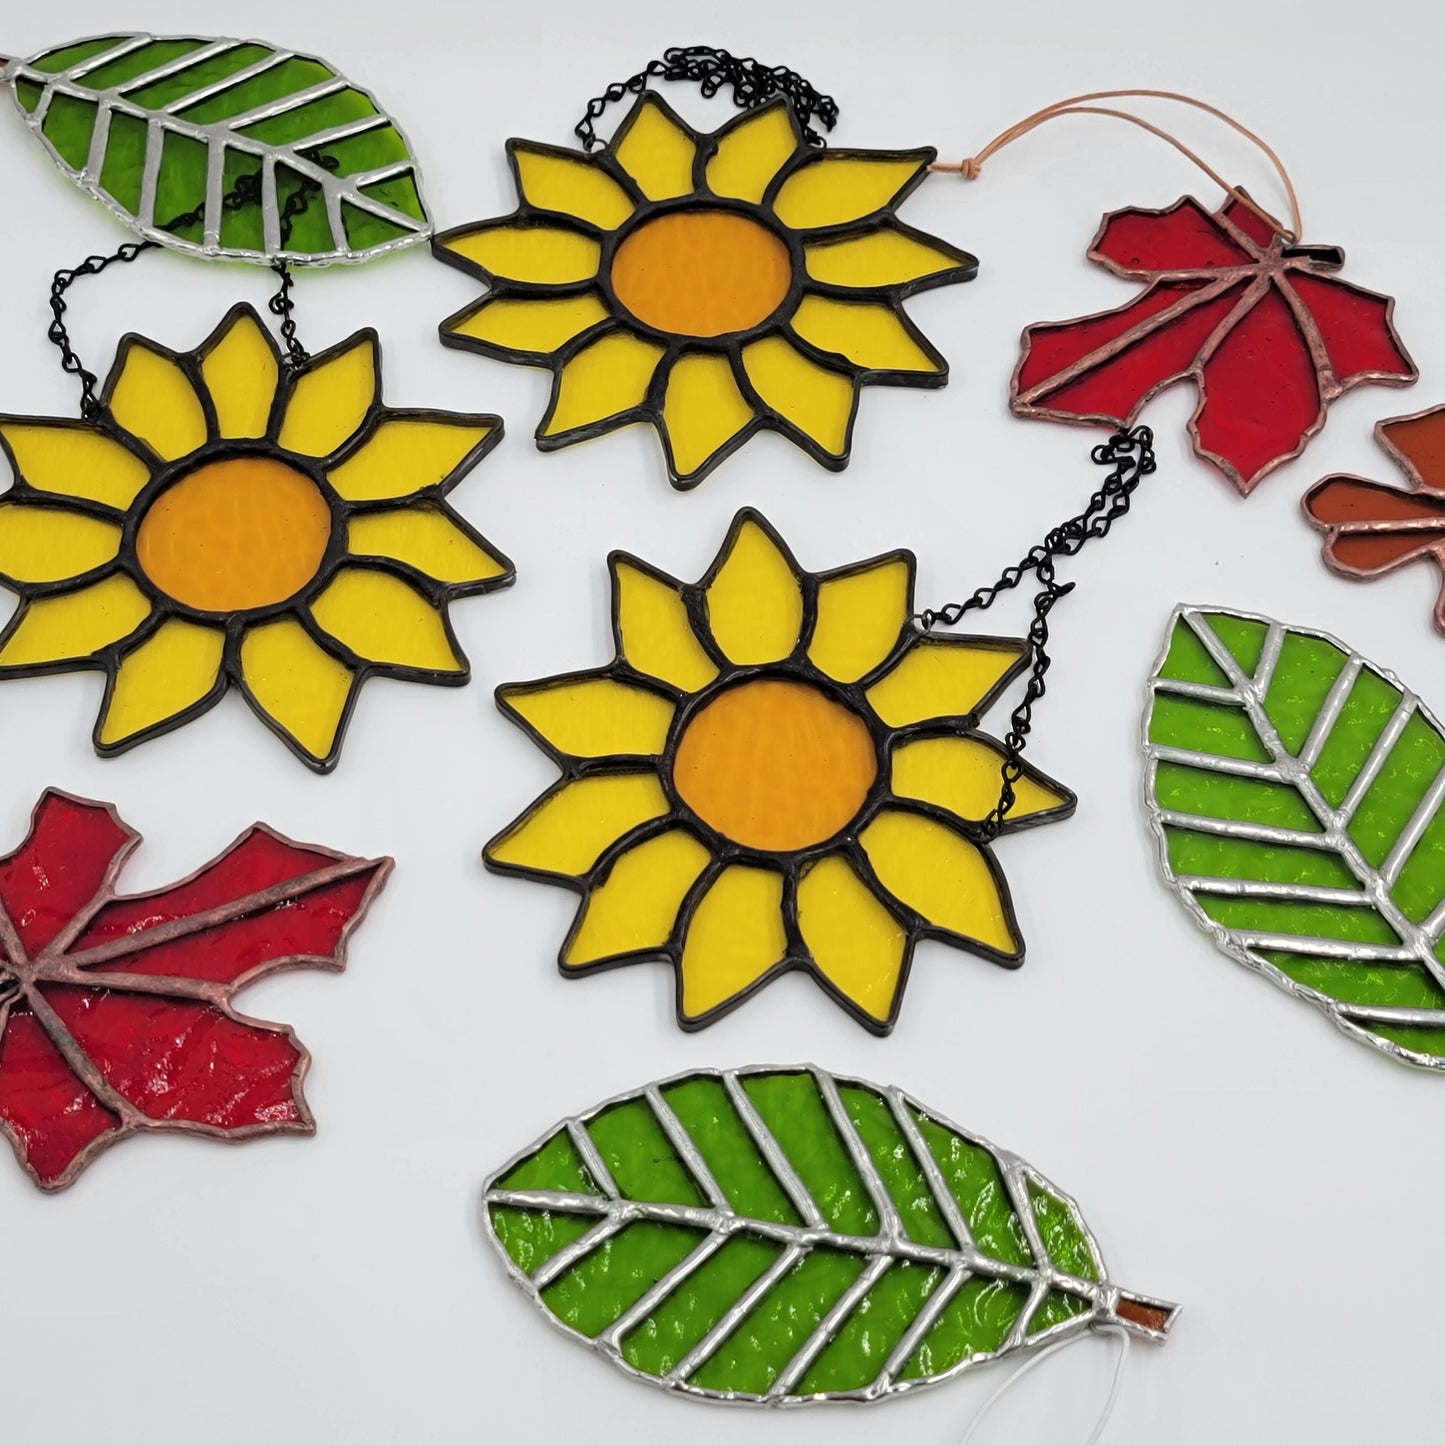 Sunflower Stained Glass Art